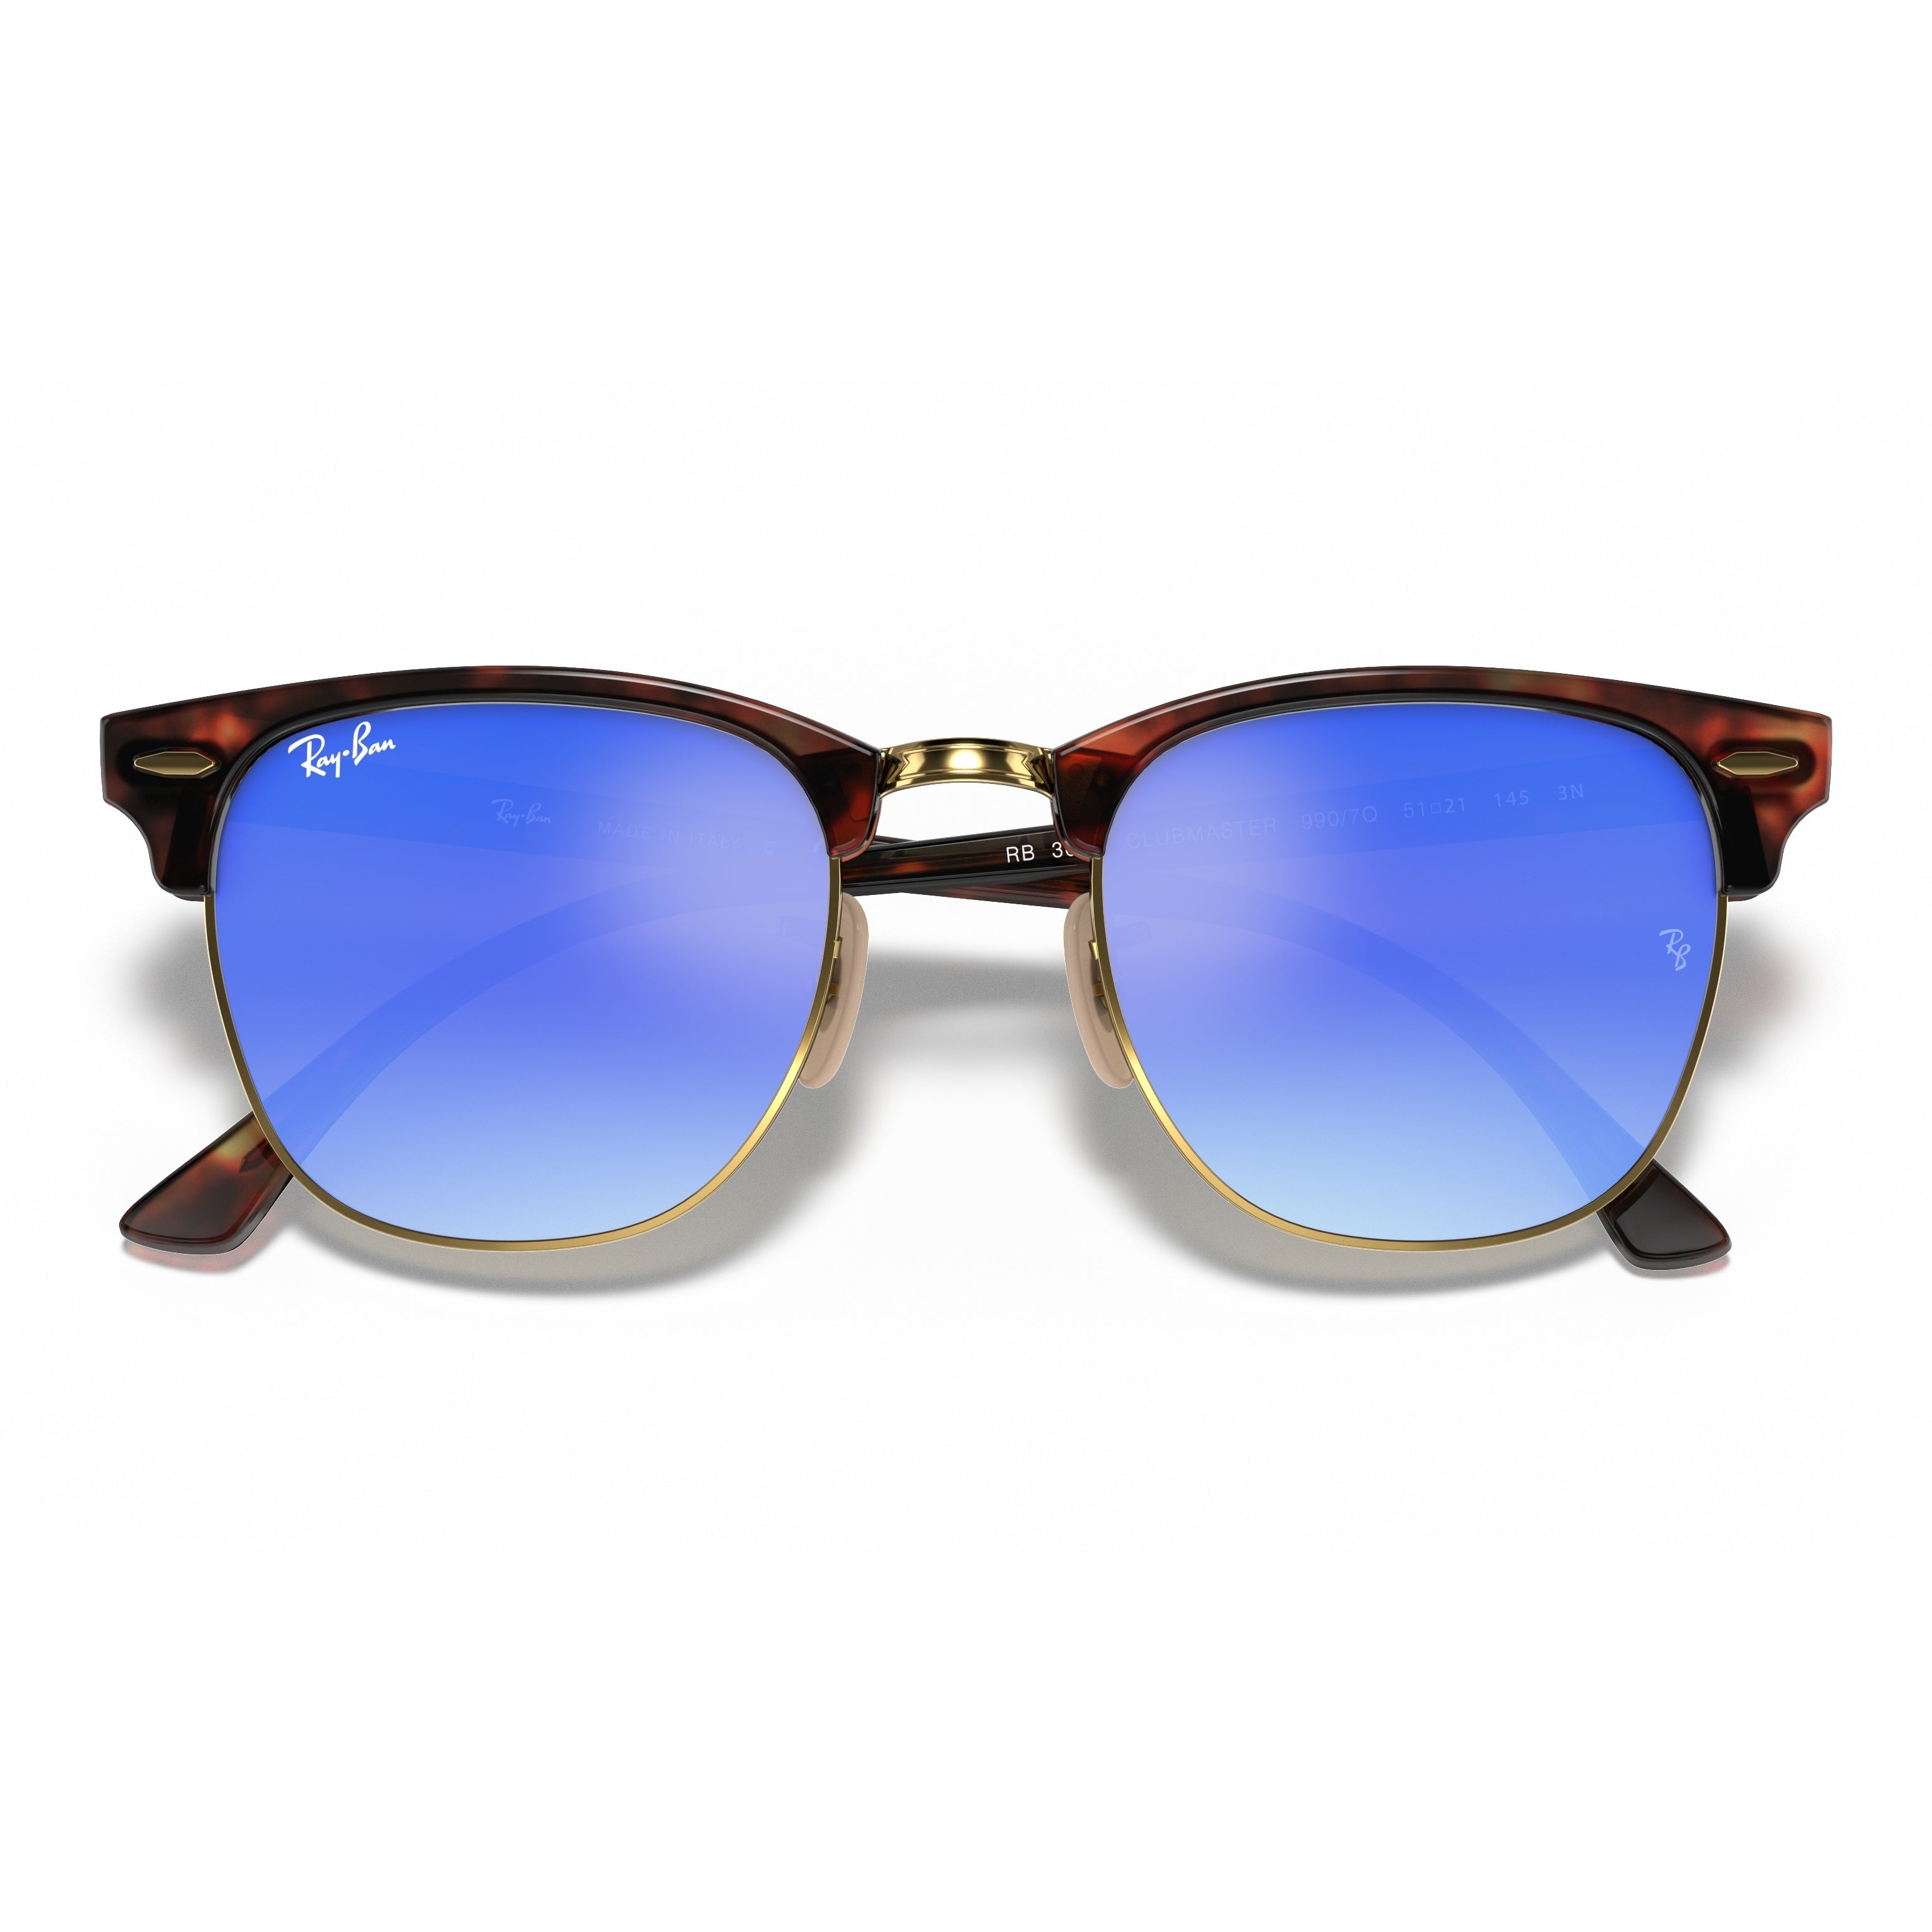 Ray-Ban Ray-Ban Clubmaster Flash Lenses Gradient Blue Gradient Square Unisex Sunglasses RB3016 990/7Q 51